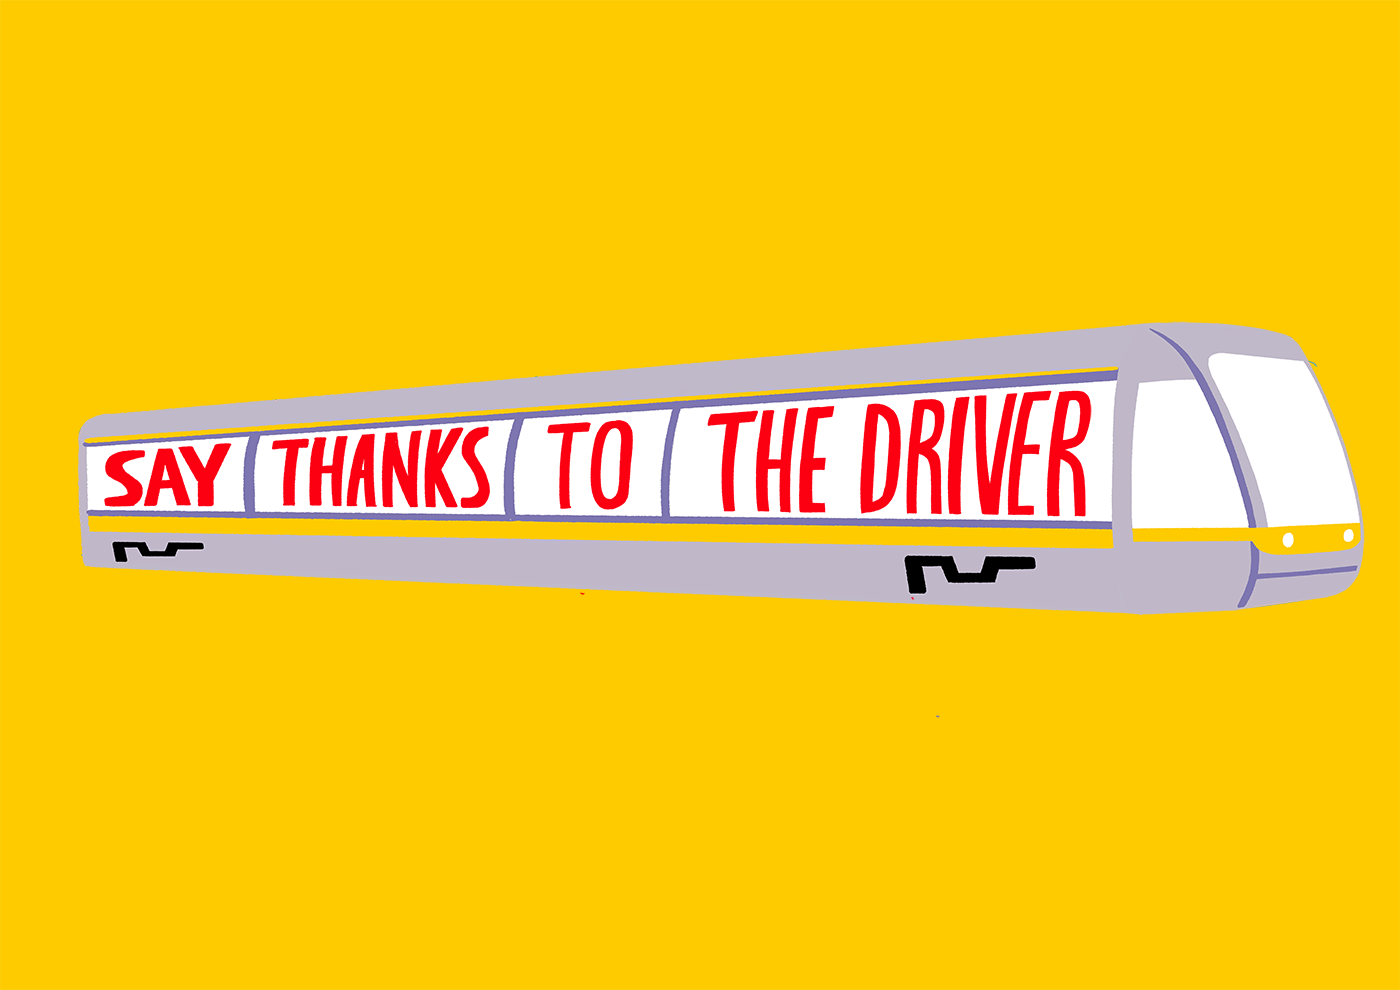 Say thanks to the driver